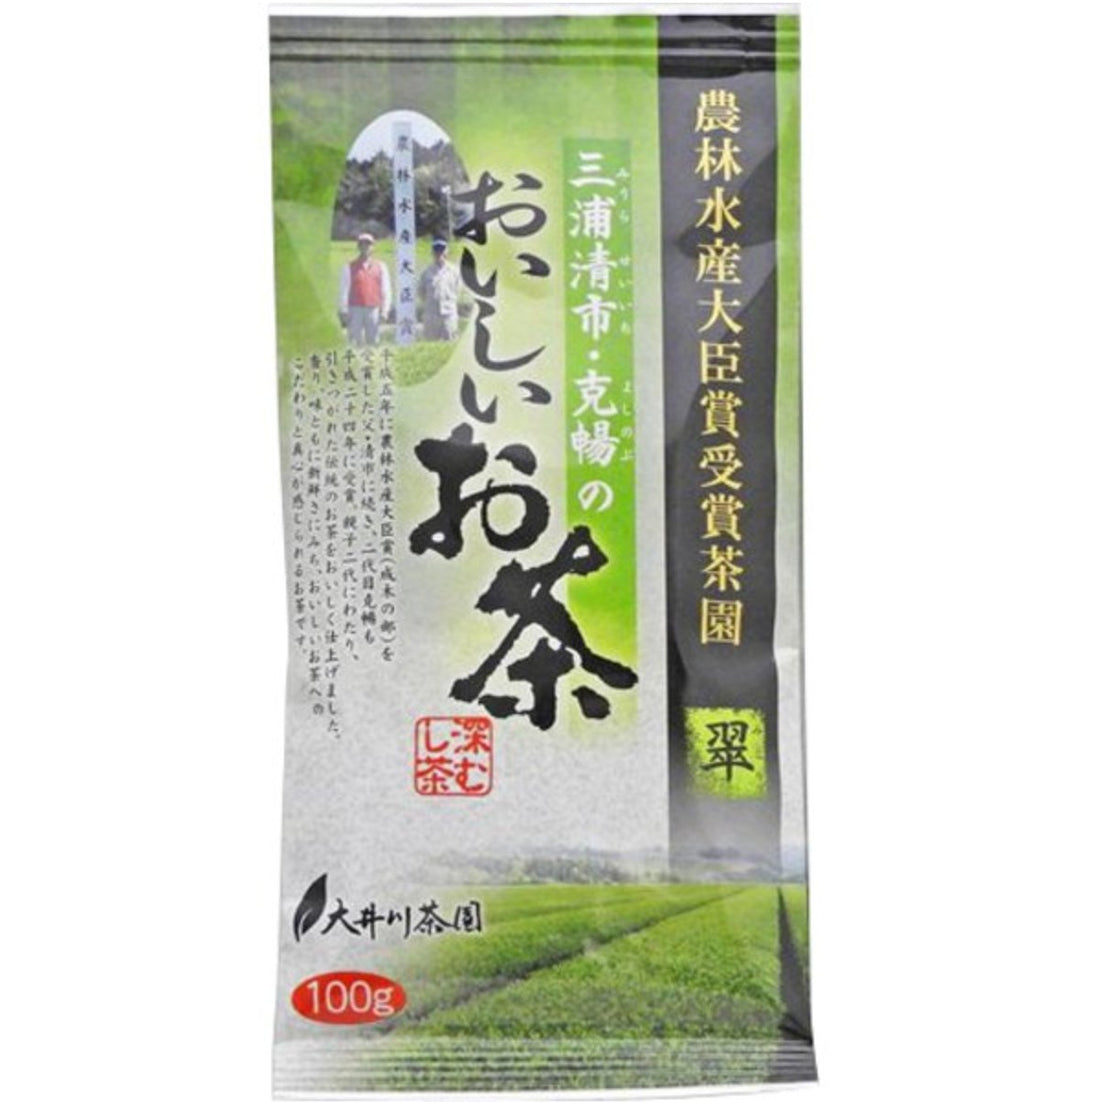 Oigawa Tea Garden Awarded the Minister of Agriculture, Forestry and Fisheries Award Delicious tea from Miura Kiyoshi and Katsunobu&